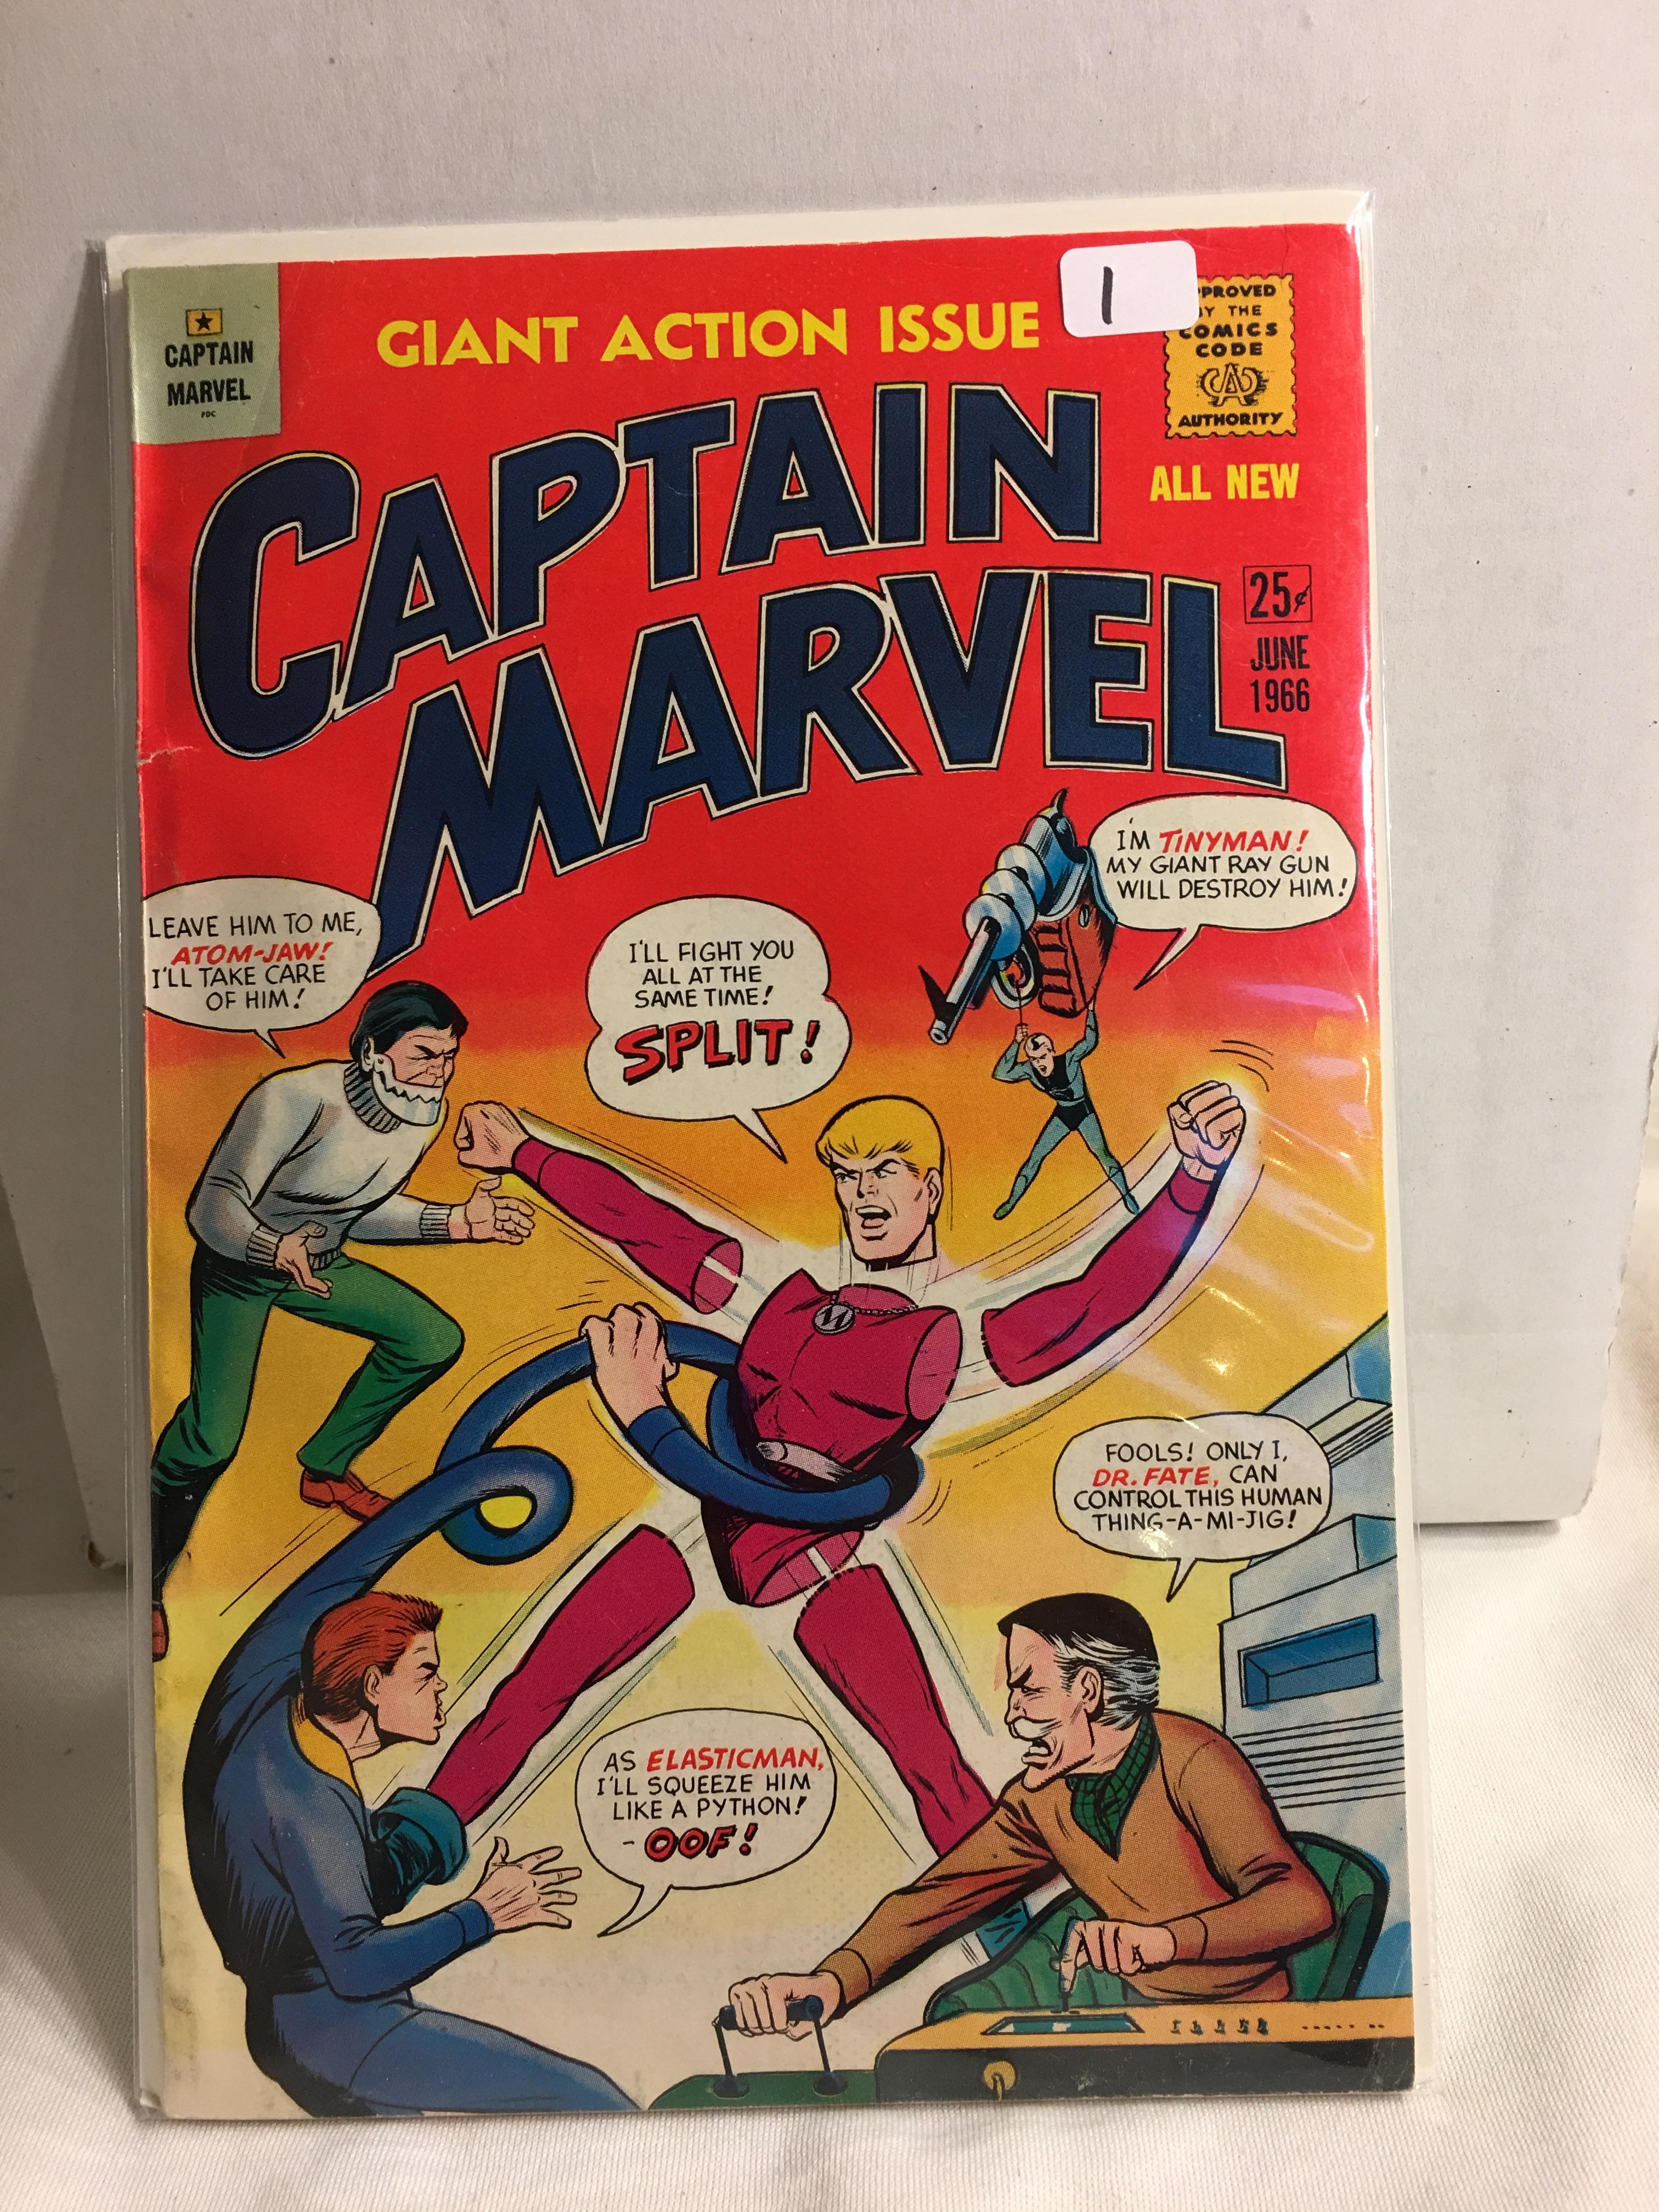 Collector Vintage 1966 Captain Marvel Giant Action Issue Captain Marvel Comic Book